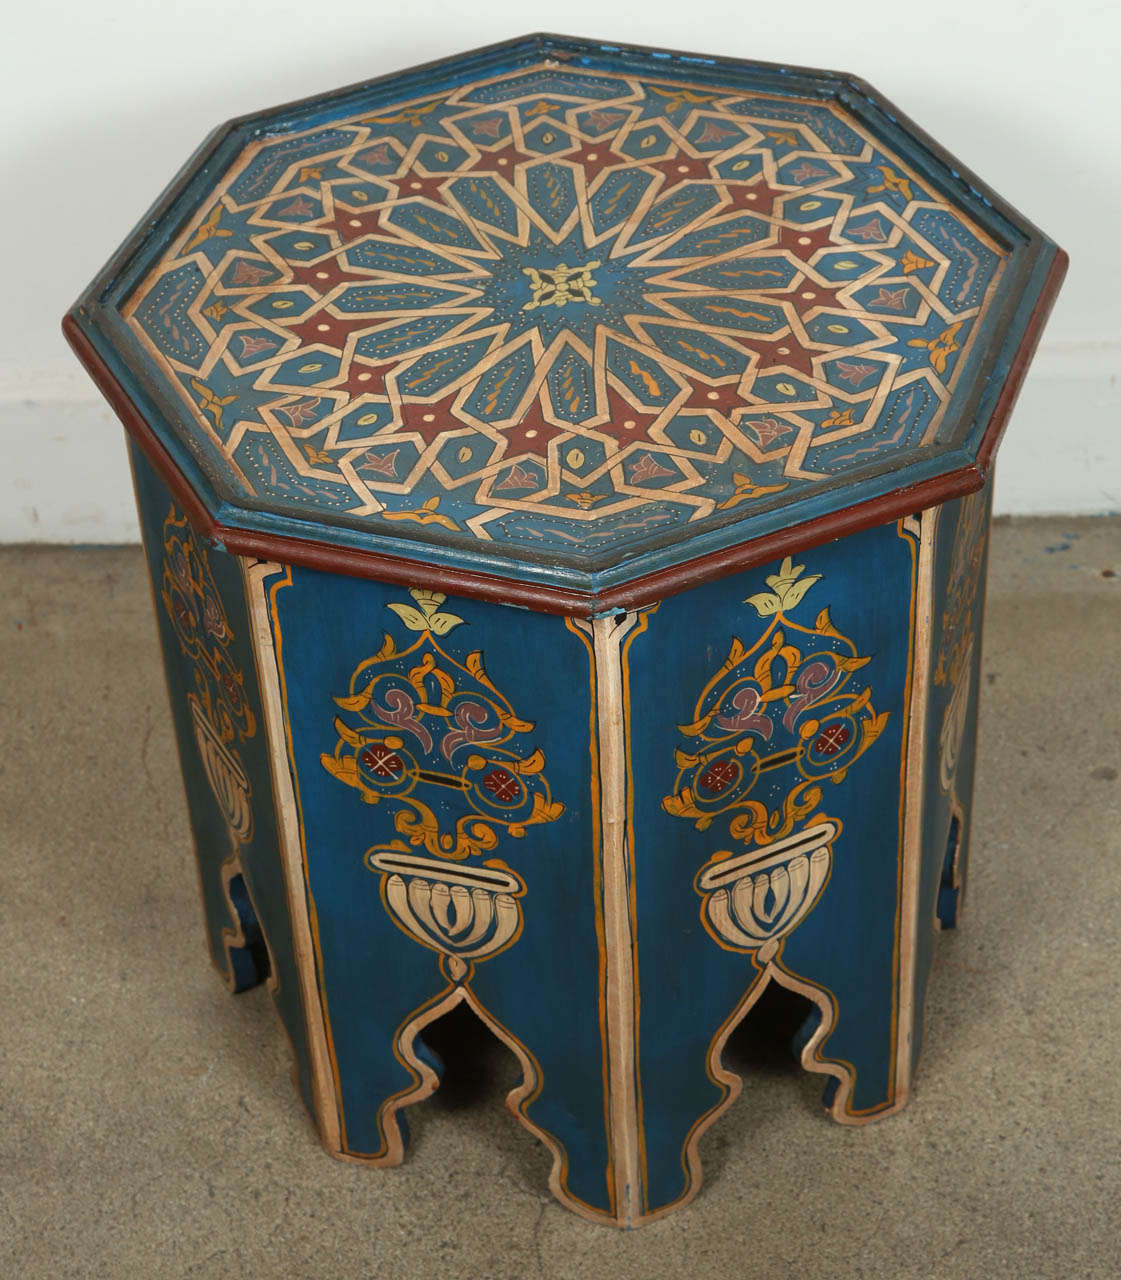 Moroccan blue colorful hand-painted side table with Moorish design. Blue background with multicolored floral and geometric designs. Very fine artwork on an octagonal shape base. You can use them as night stand or side table. This exotic side tables